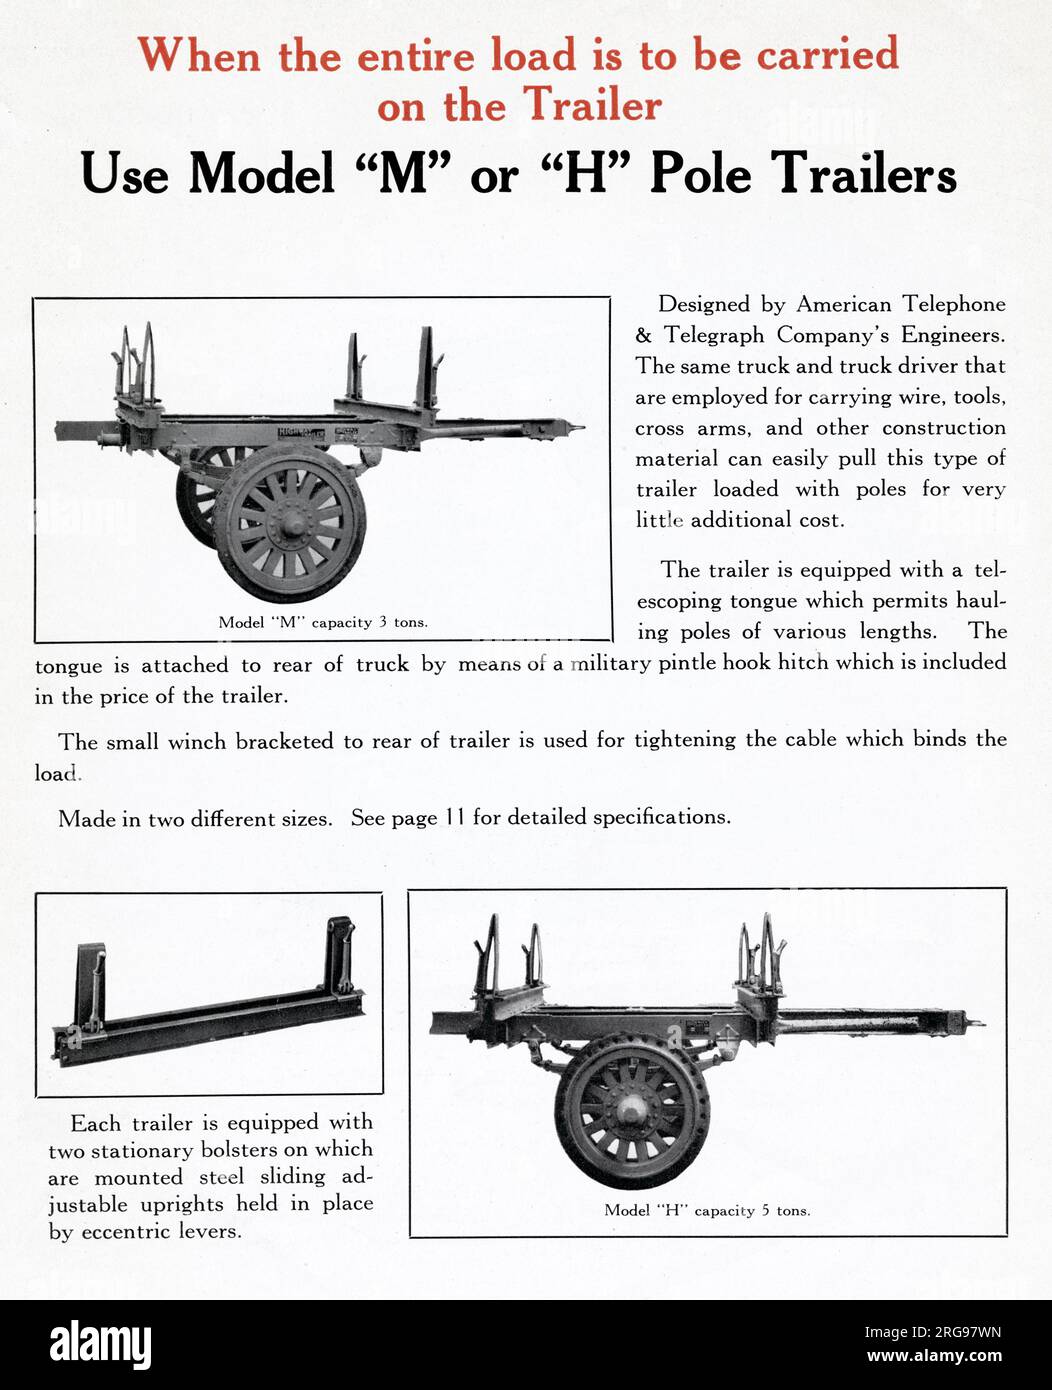 Model M or H Pole Trailers and accessories -- when the entire load is to be carried on the trailer. Designed by American Telephone & Telegraph Company's engineers. Stock Photo